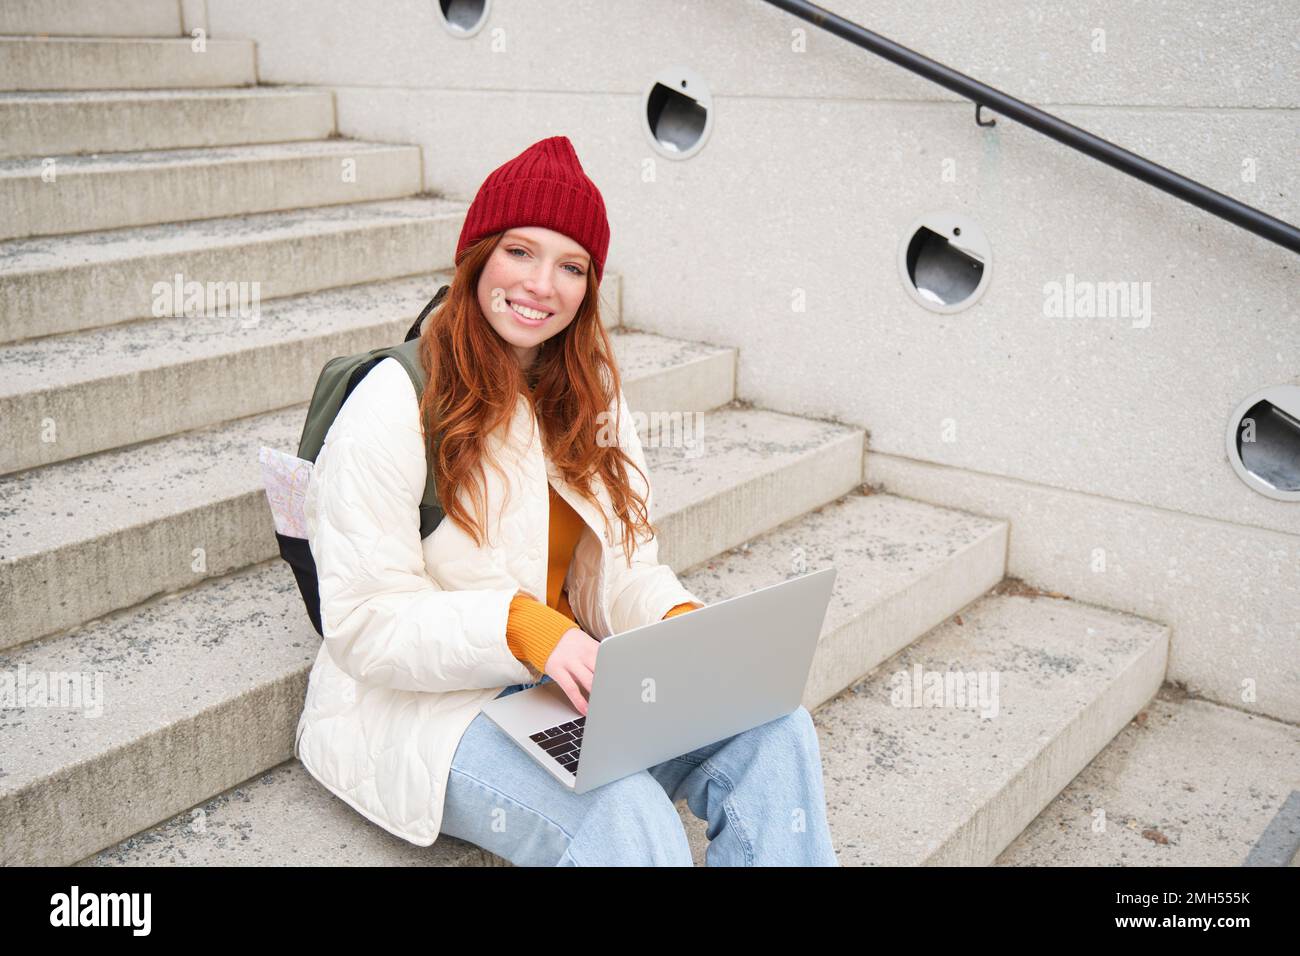 Portrait of young girl traveller, sitting with backpack and map of city, working on laptop, connecting to public wifi and sitting on stairs outdoors Stock Photo